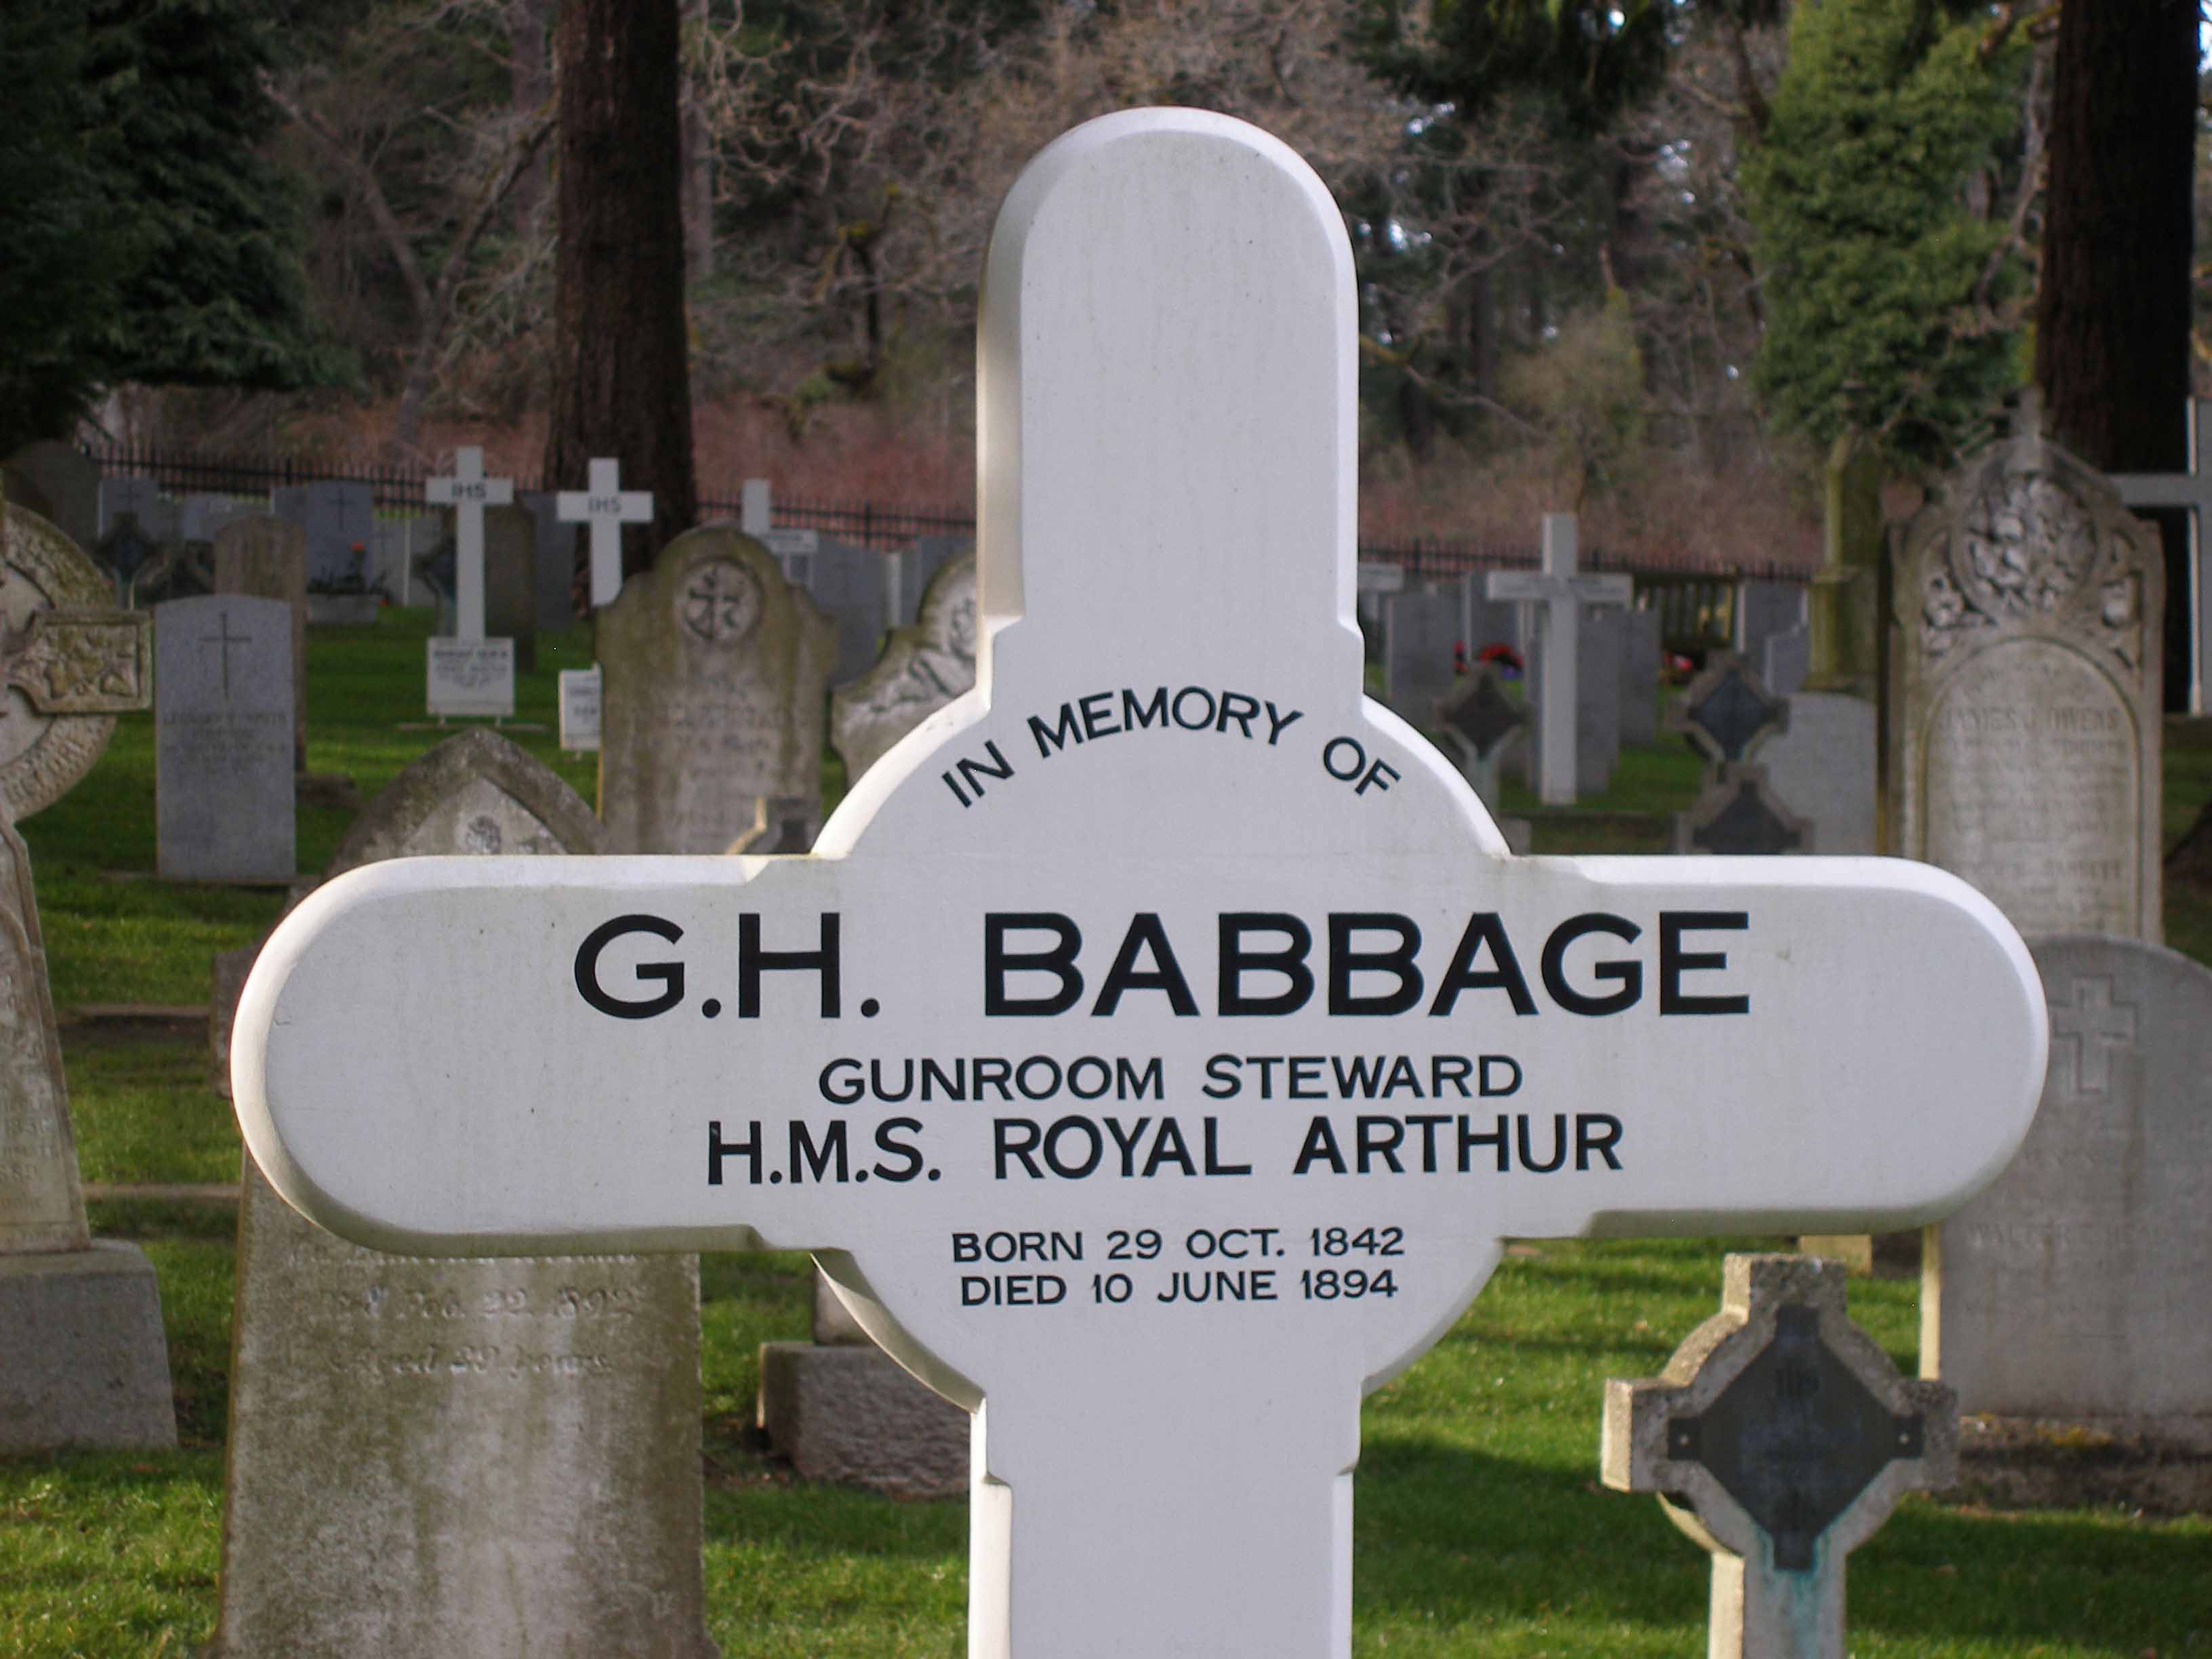 George Henry babbage tomb, close up